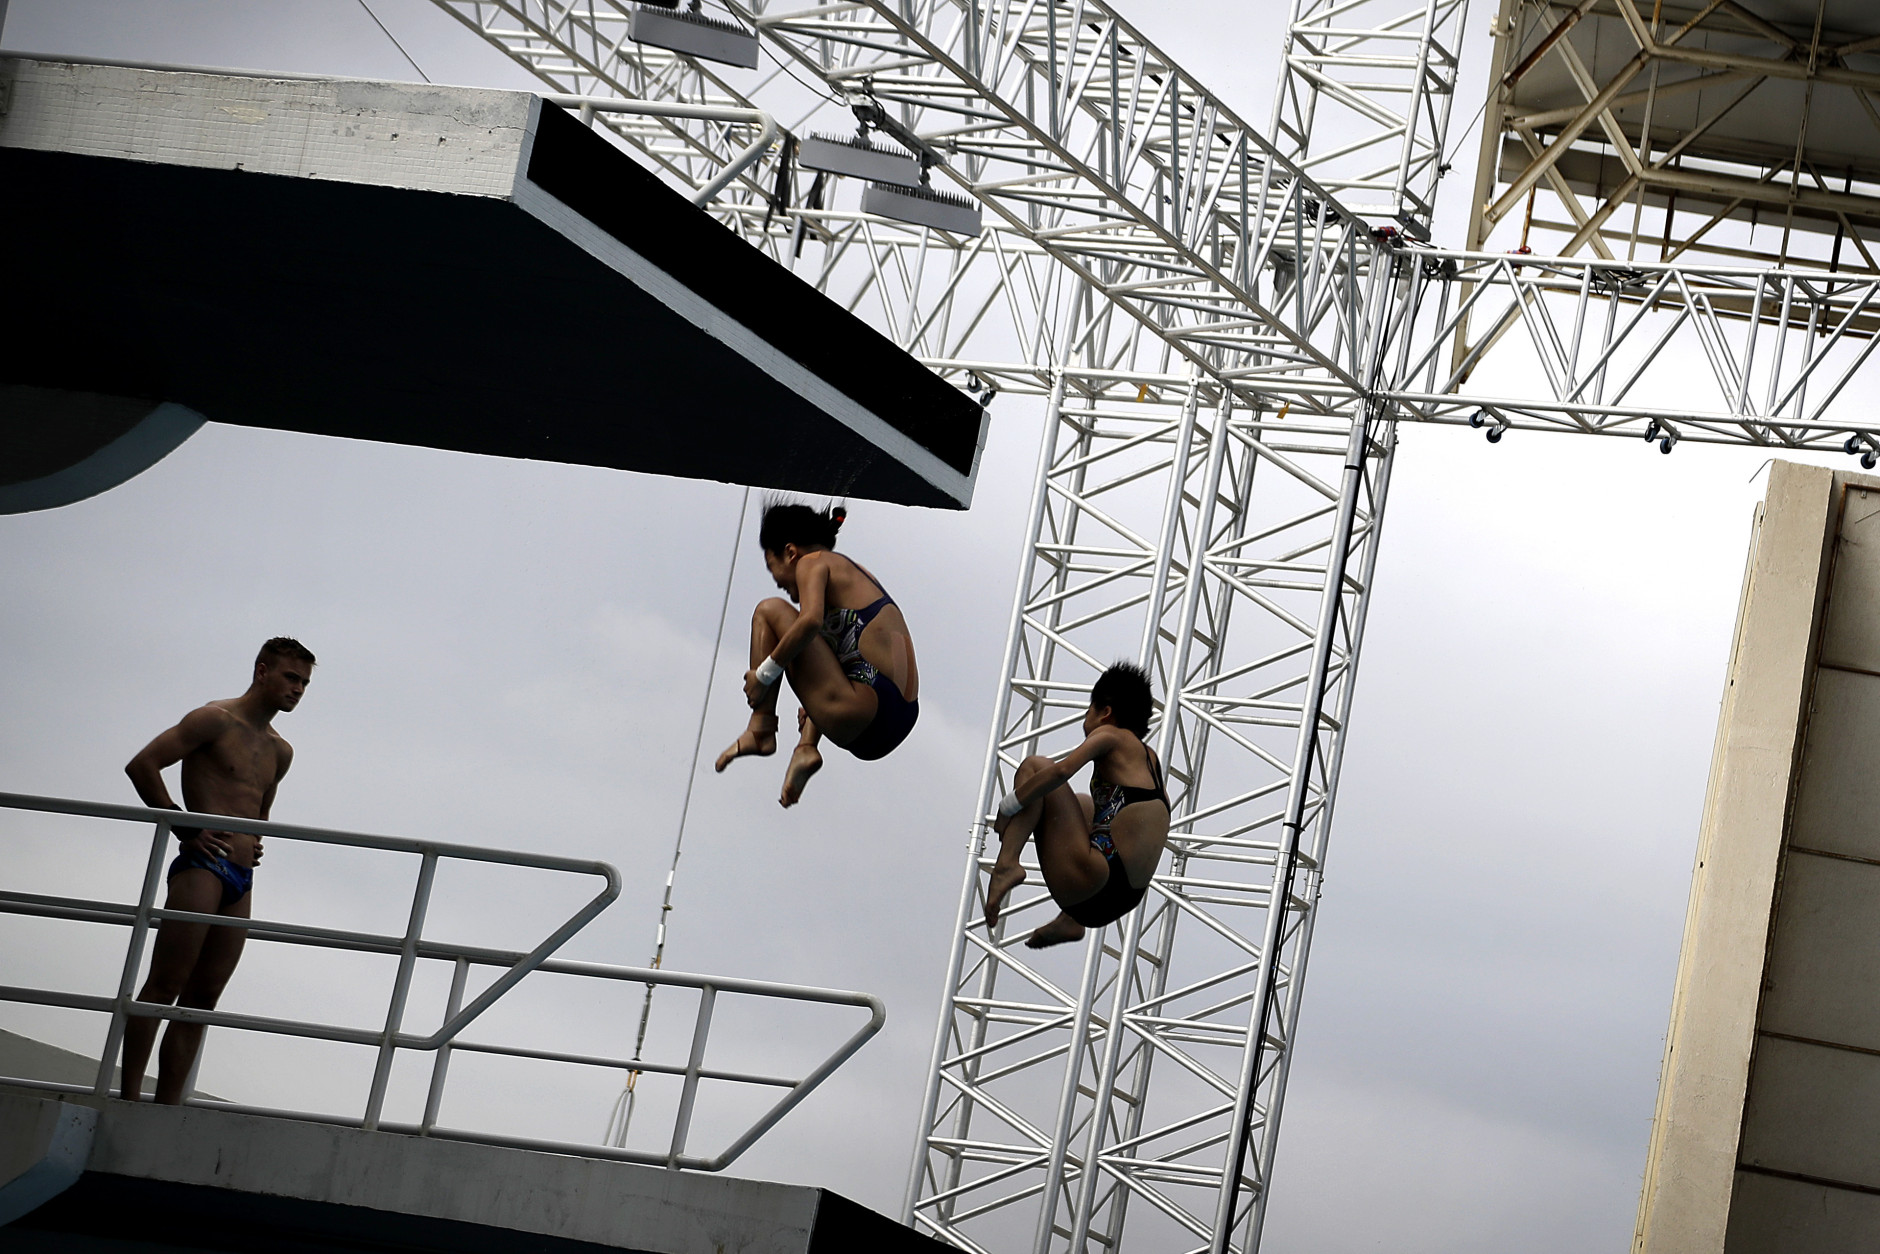 Divers are seen in silhouette as they take part in a training session in the Maria Lenk Aquatic Center ahead of the 2016 Summer Olympics in Rio de Janeiro, Brazil, Wednesday, Aug. 3, 2016. (AP Photo/Wong Maye-E)